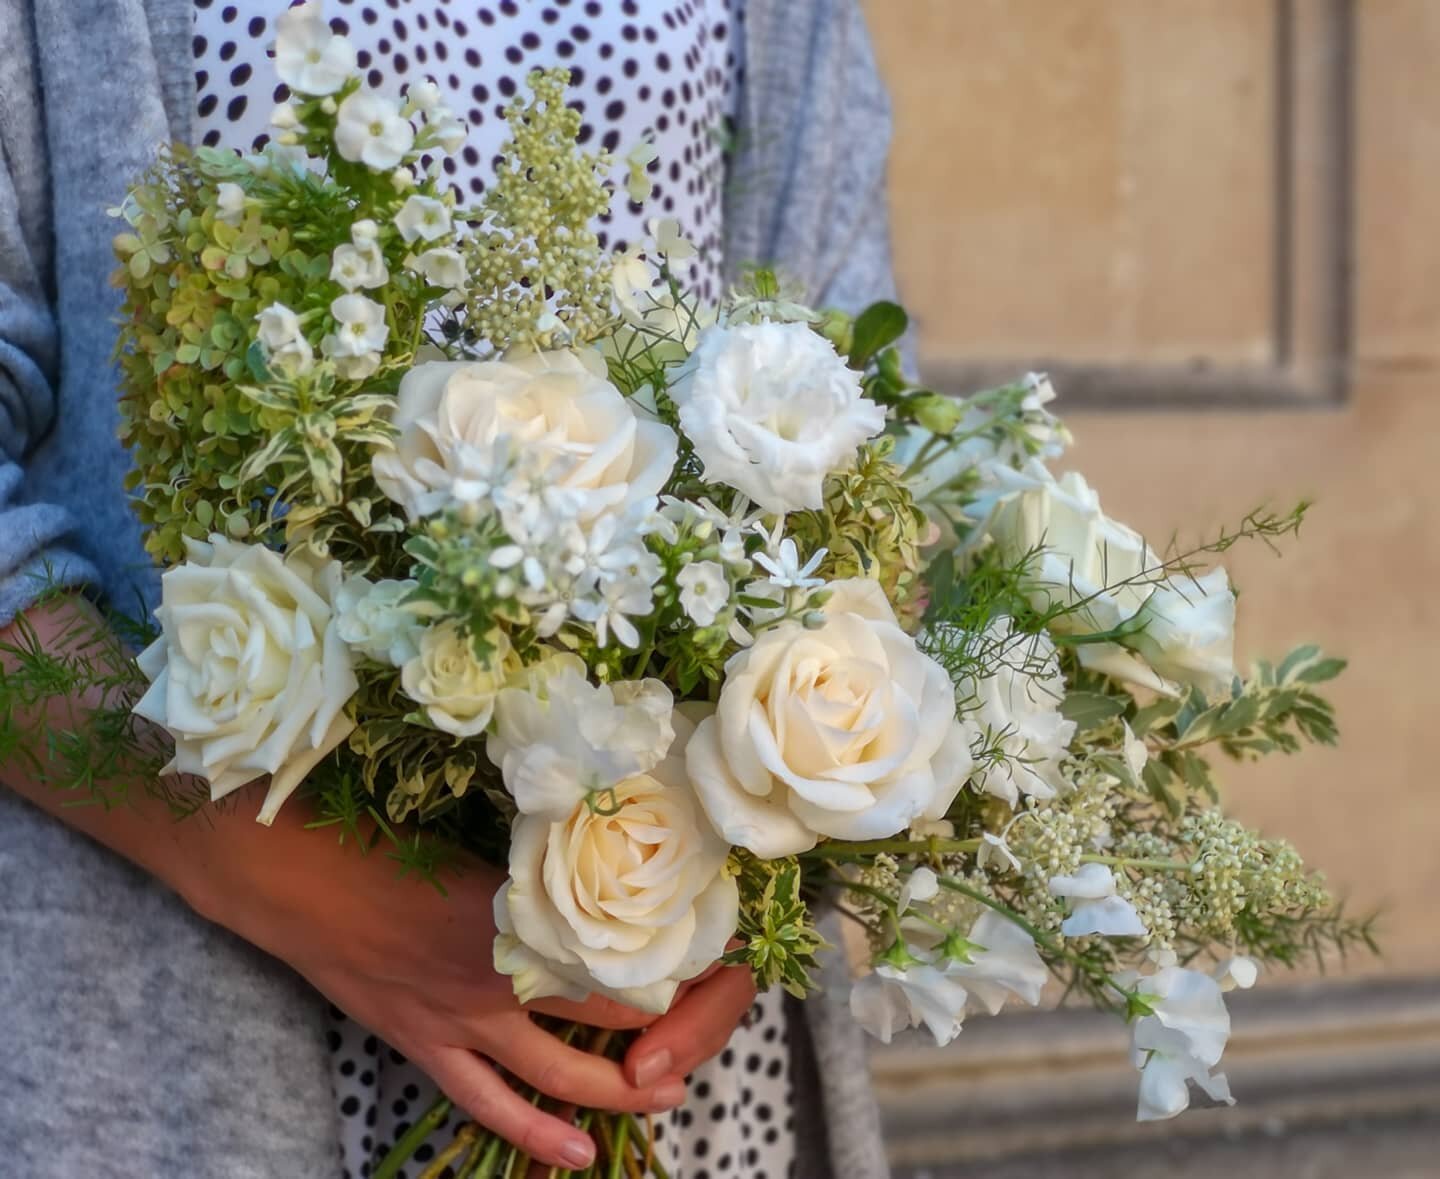 Nudes, creams and greens.. A classic colour palette in a natural undone style.

.
.
.

#underthefloralspell #sustainablefloristry #foamfreeflowers #flowersandotherstories #thecotswoldflorists #cotswoldflorist #cotswoldwedding #londonflorist #boholuxe